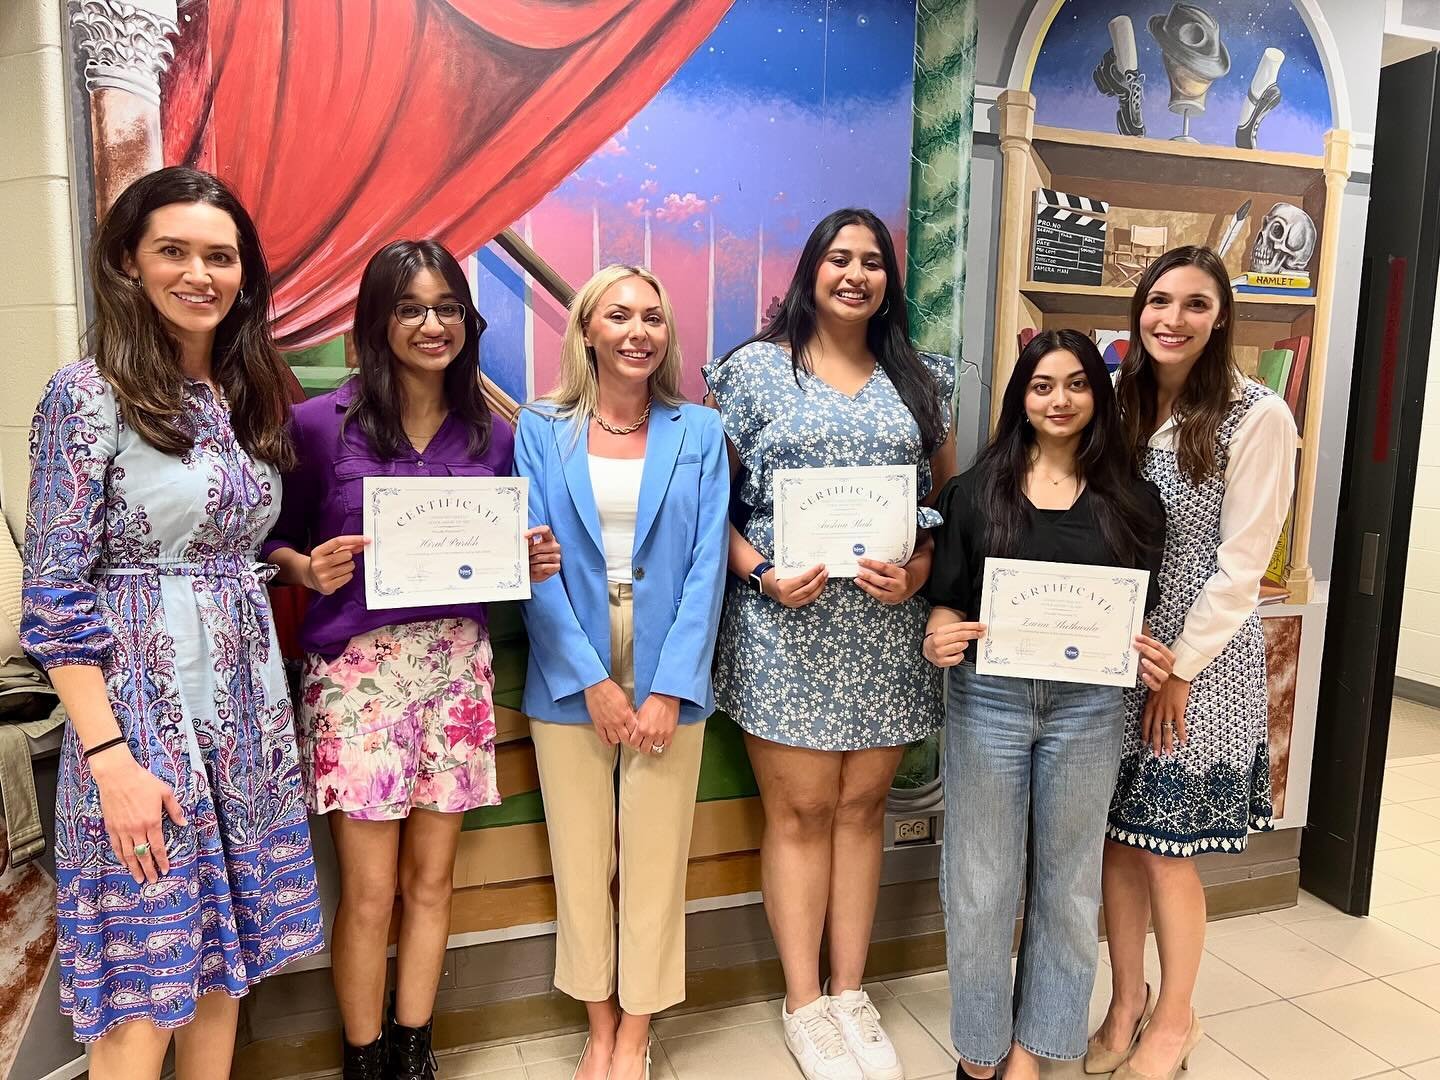 Each year, BJWC awards monetary scholarships to four Barrington High School students. 

⭐️JANICE CLARKE SCHOLARSHIP⭐️ Awarded to one student who exemplifies leadership, outstanding excellence in academics, and community service throughout high school